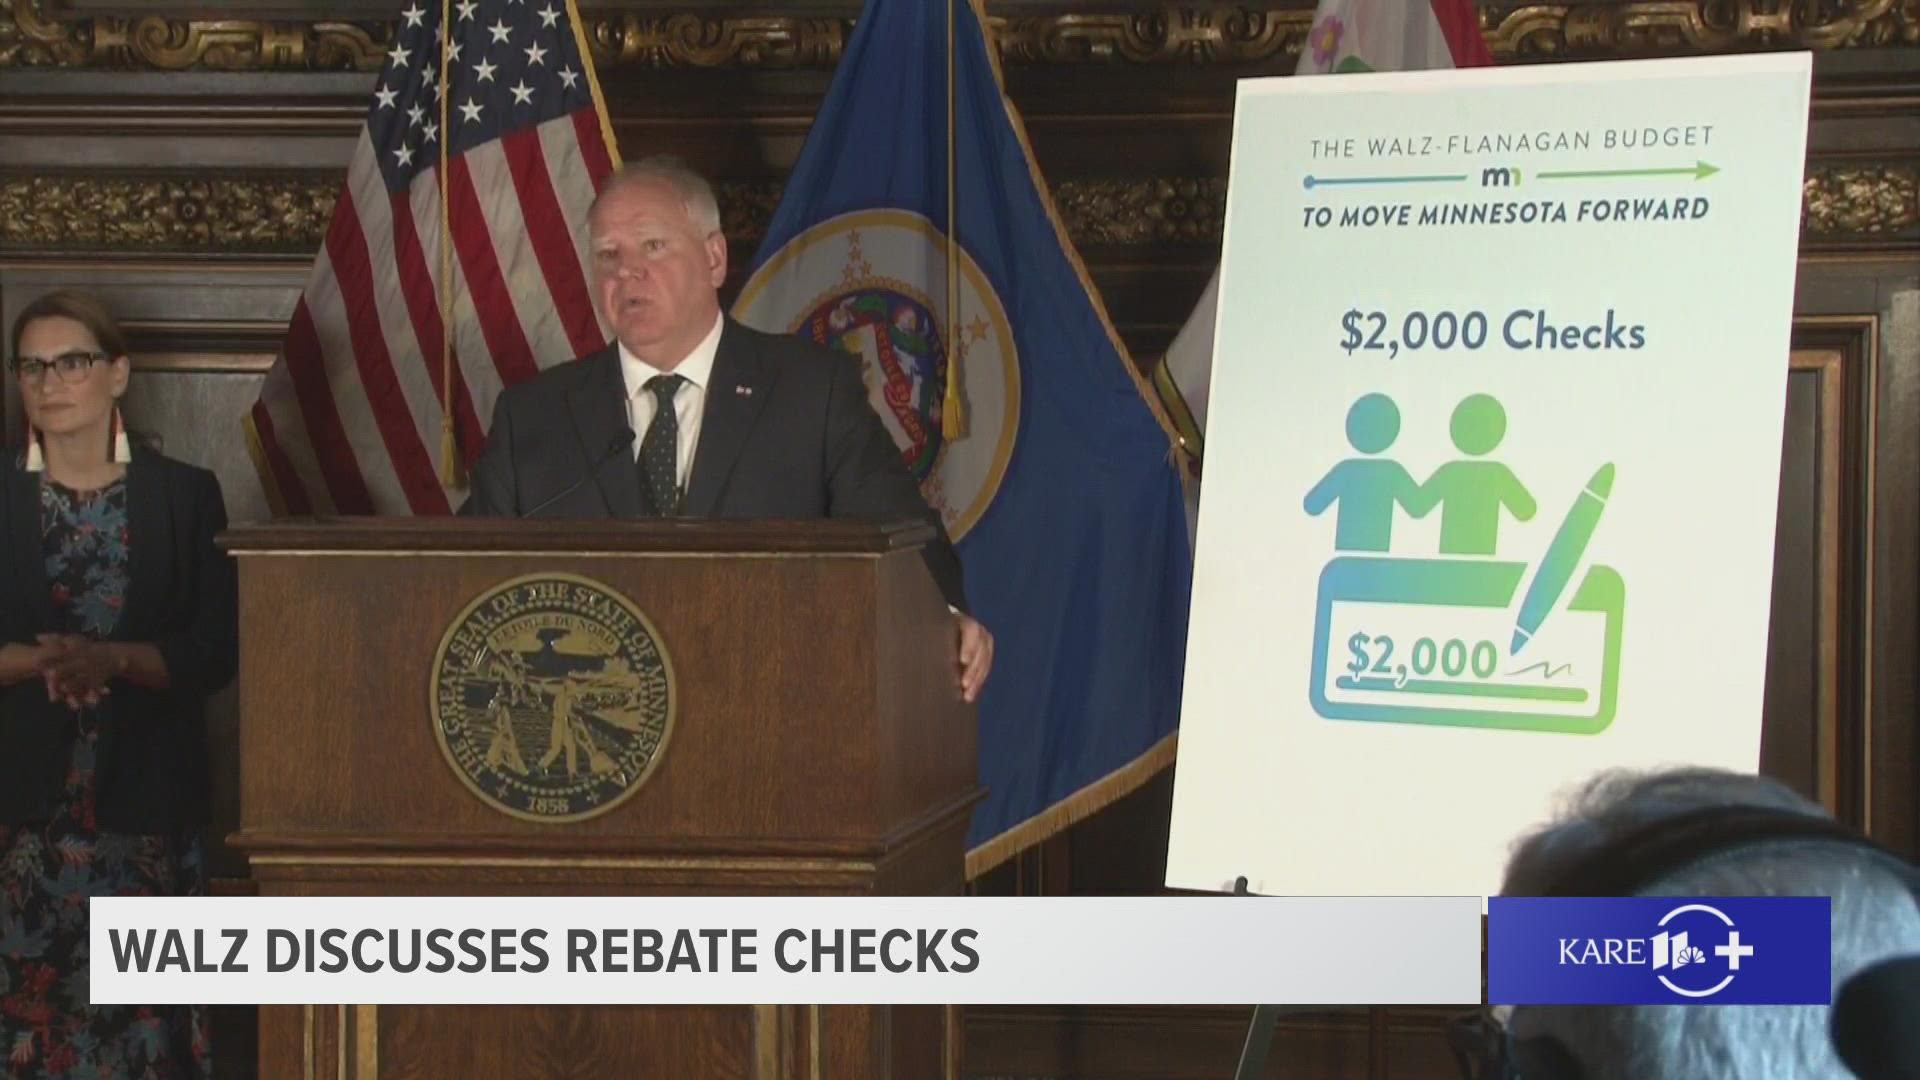 Governor Tim Walz is challenging his GOP counterparts to agree to a $4 billion rebate package, with $2,000 going to families and $1,000 to individuals.